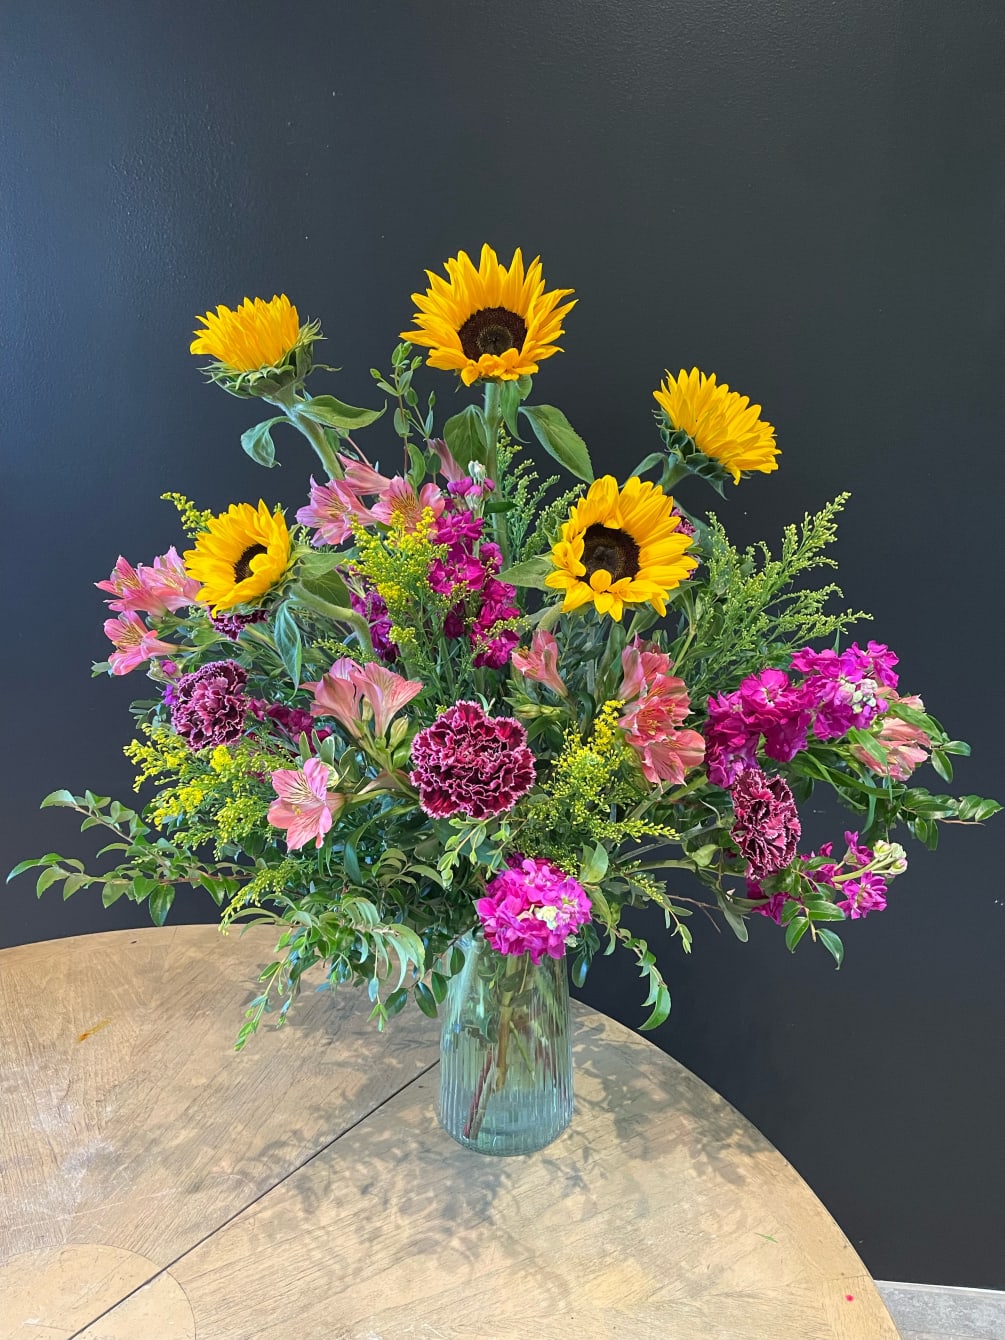 Beautiful sunflowers arranged in a unique vase to give it a wild